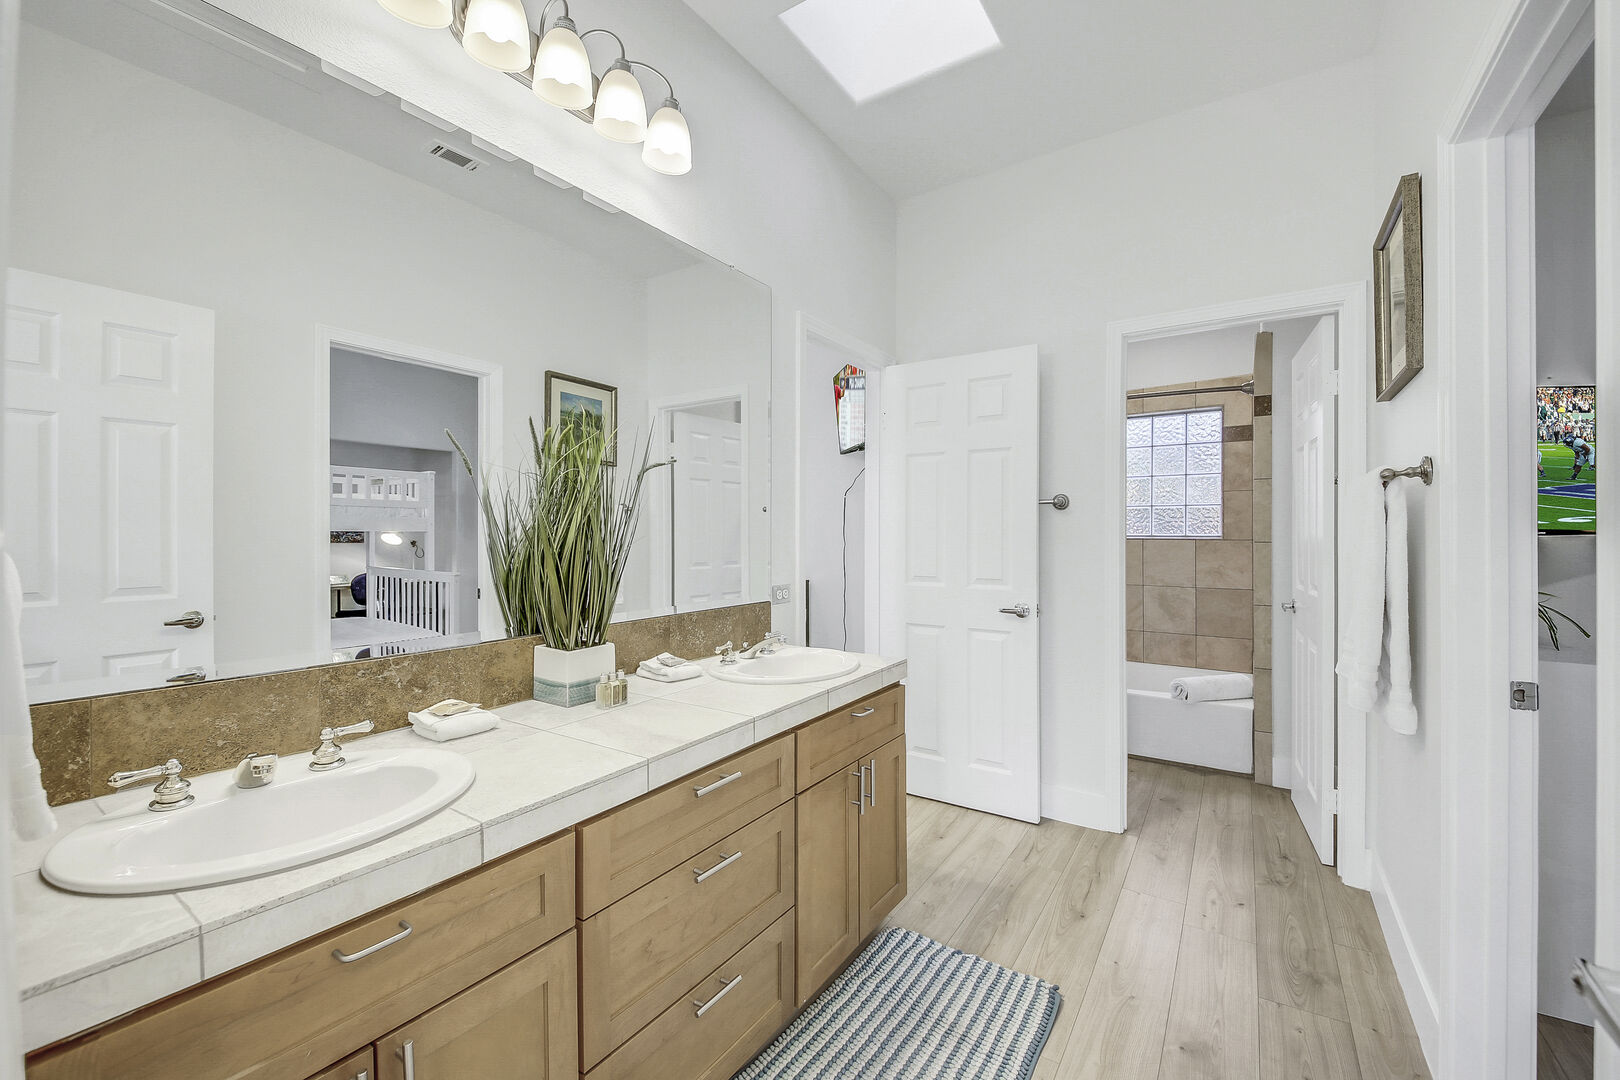 Shared, jack and jill bathroom features a shower and tub combo, and double vanity sinks.